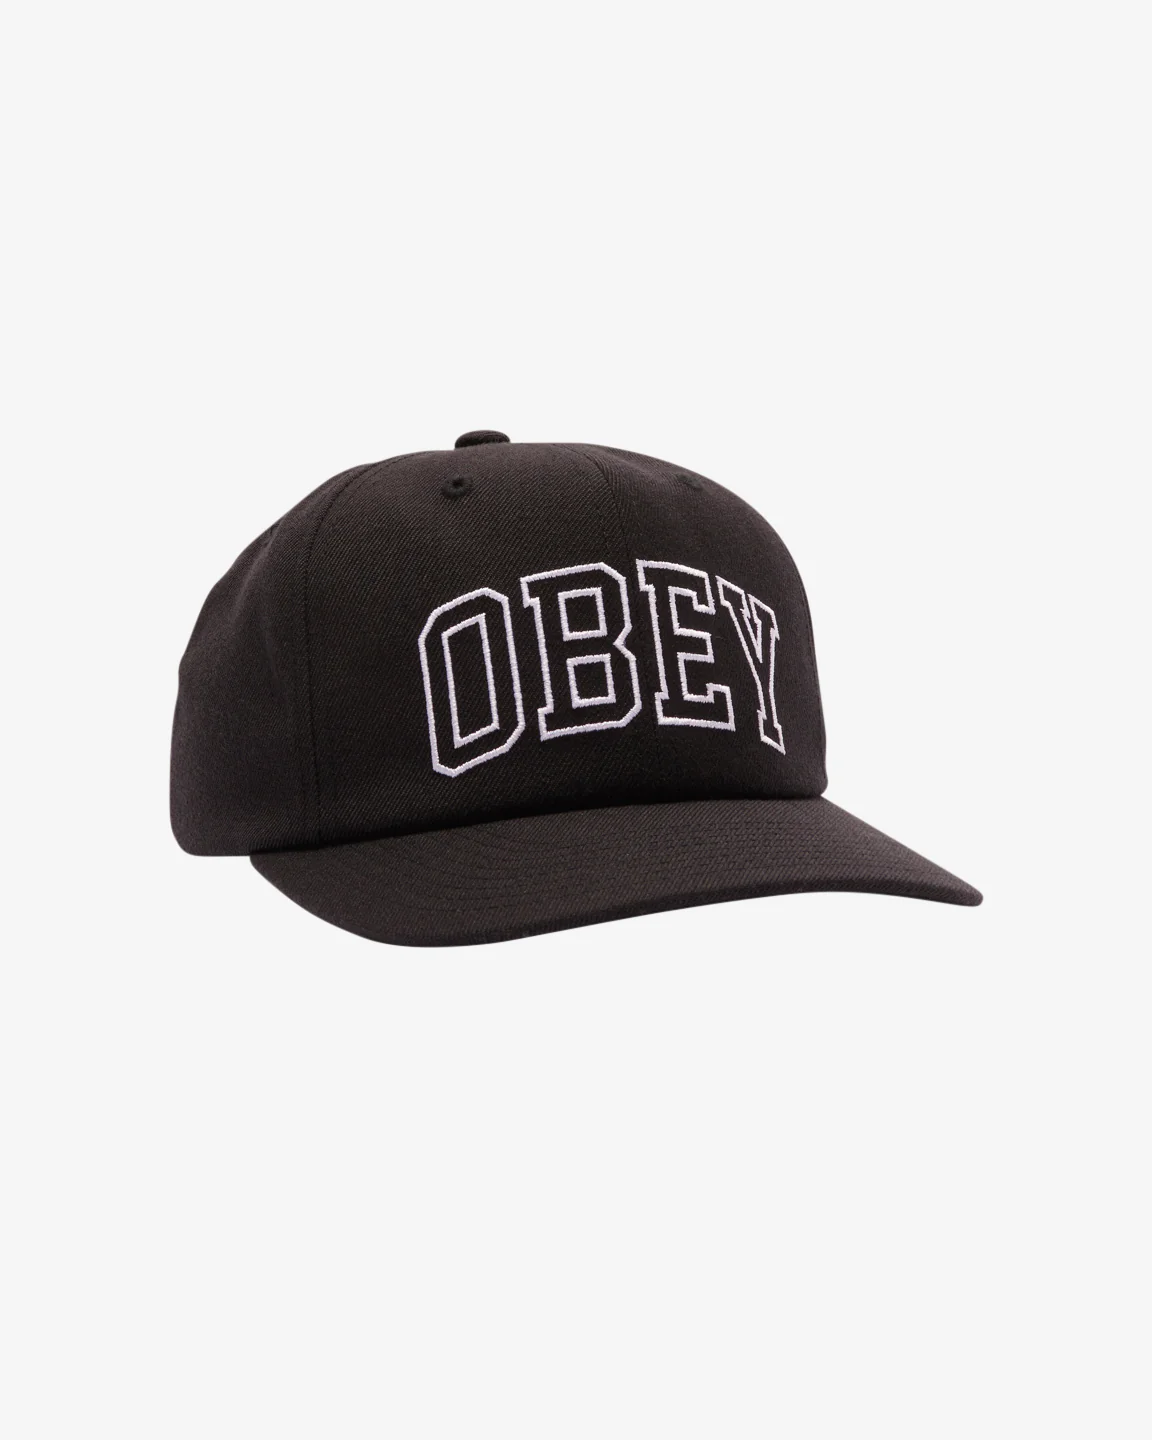 Obey ACADEMY 6PANEL CLASSIC BLACK